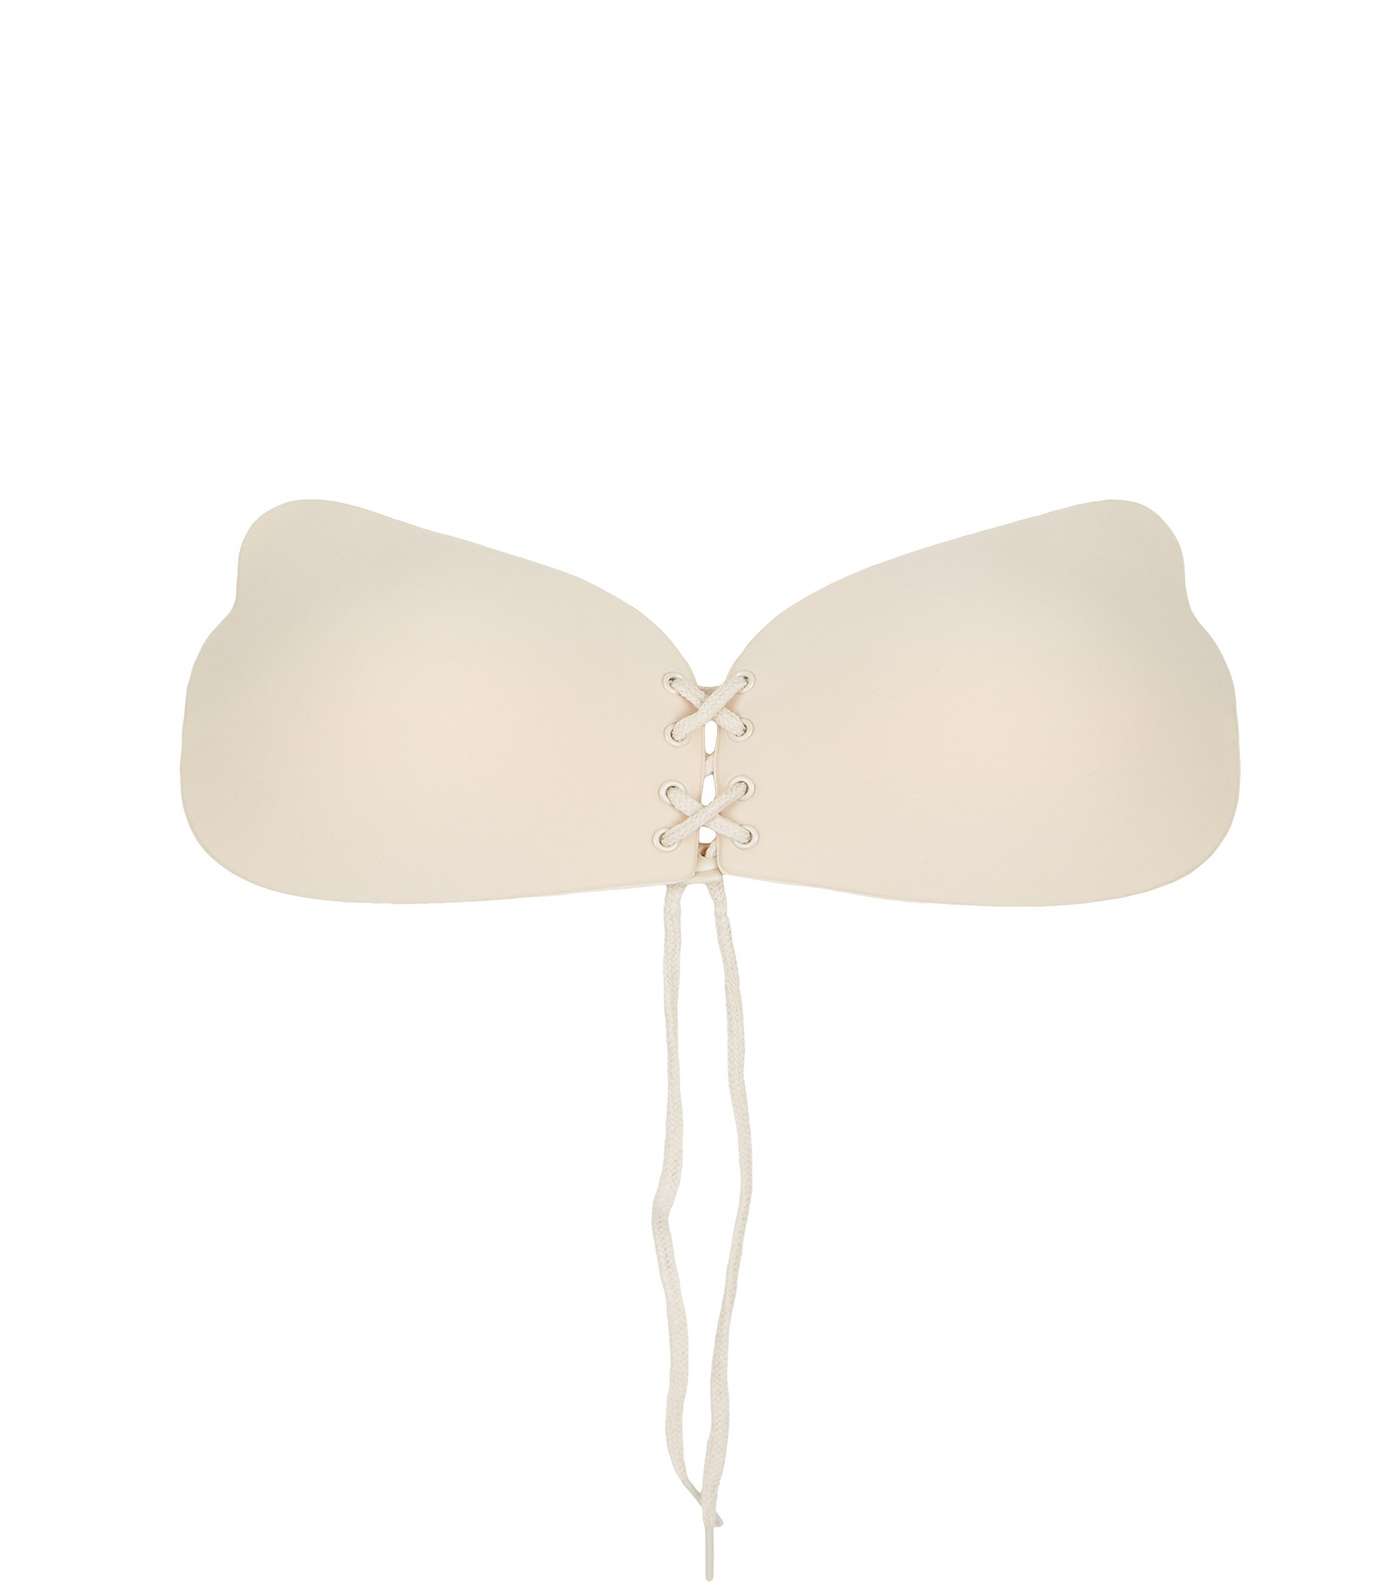 Perfection Beauty Cream B Cup Lace Up Stick On Bra Image 3